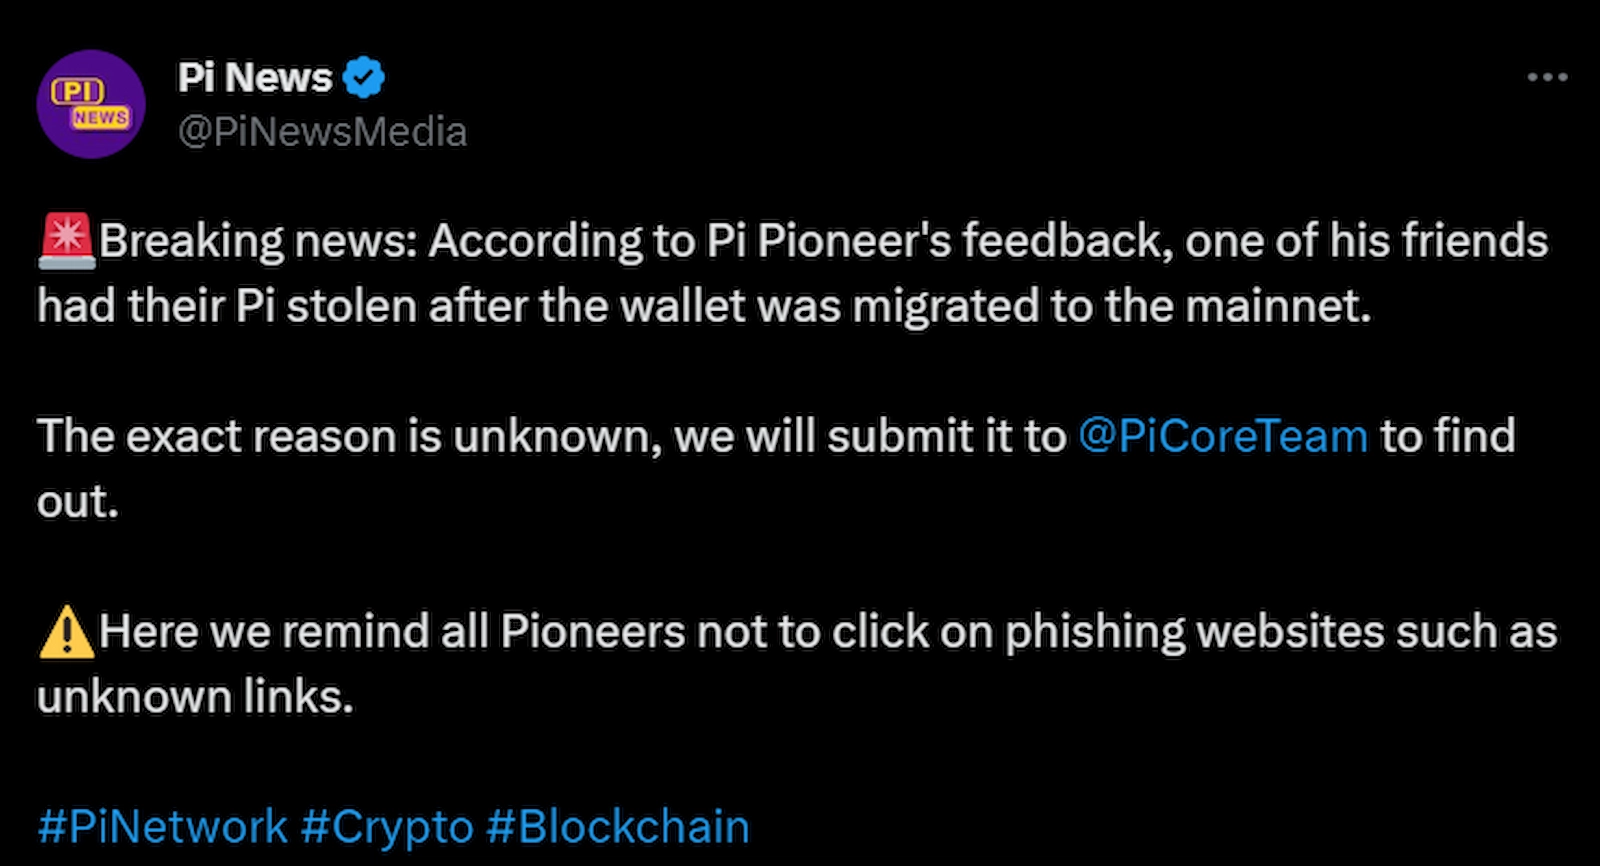 Pi Network users reported loss of tokens from their wallets post migration.